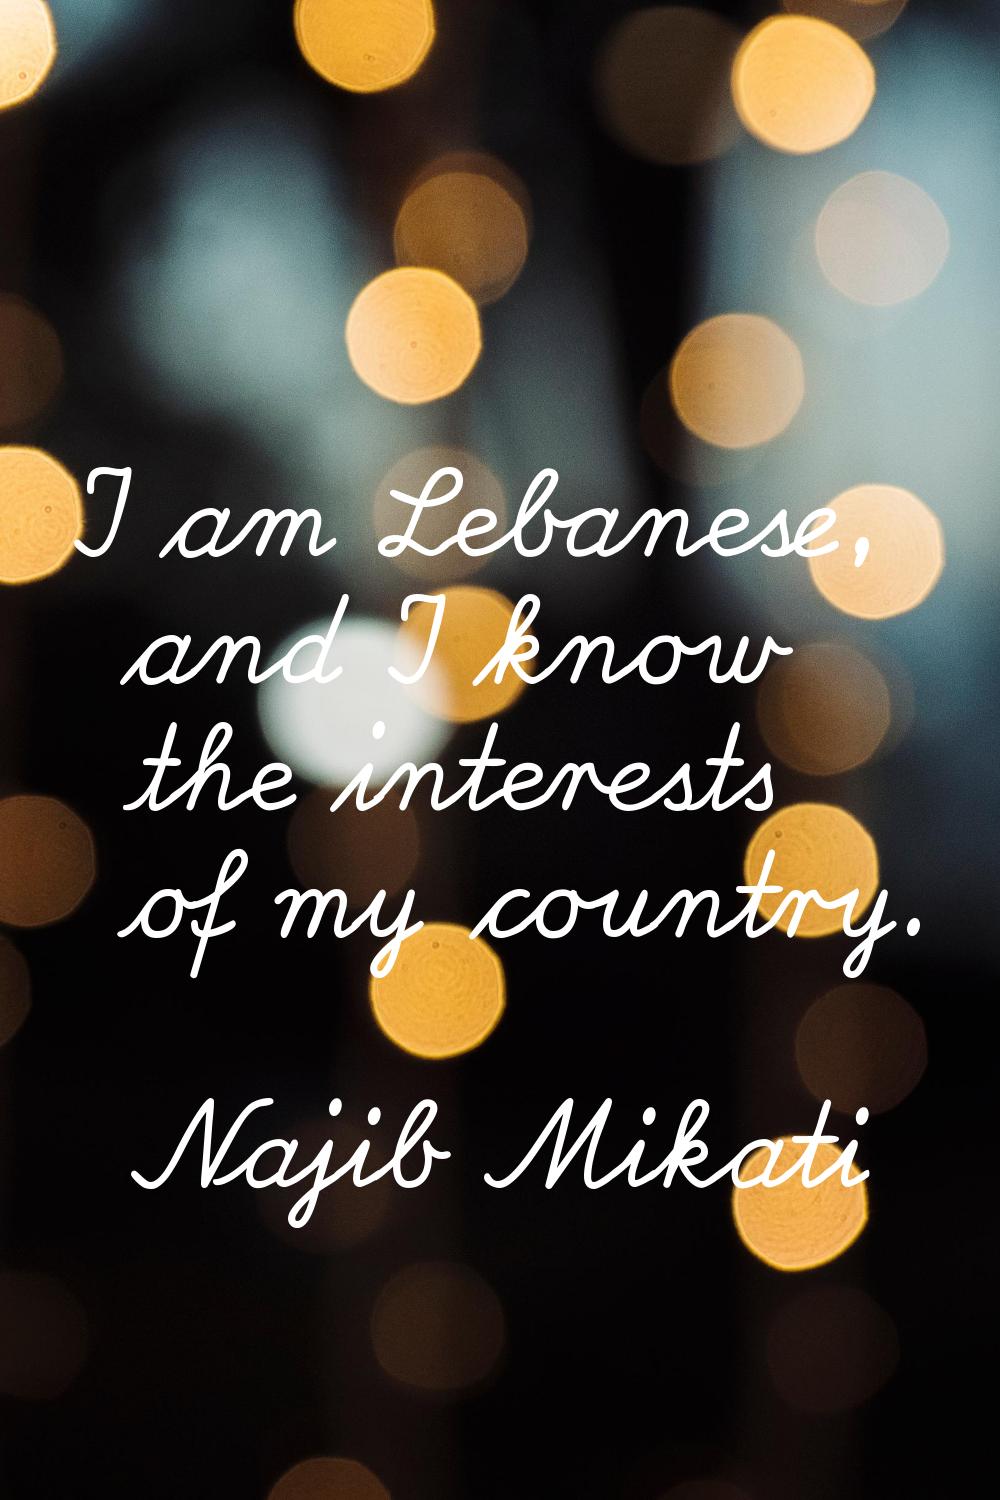 I am Lebanese, and I know the interests of my country.